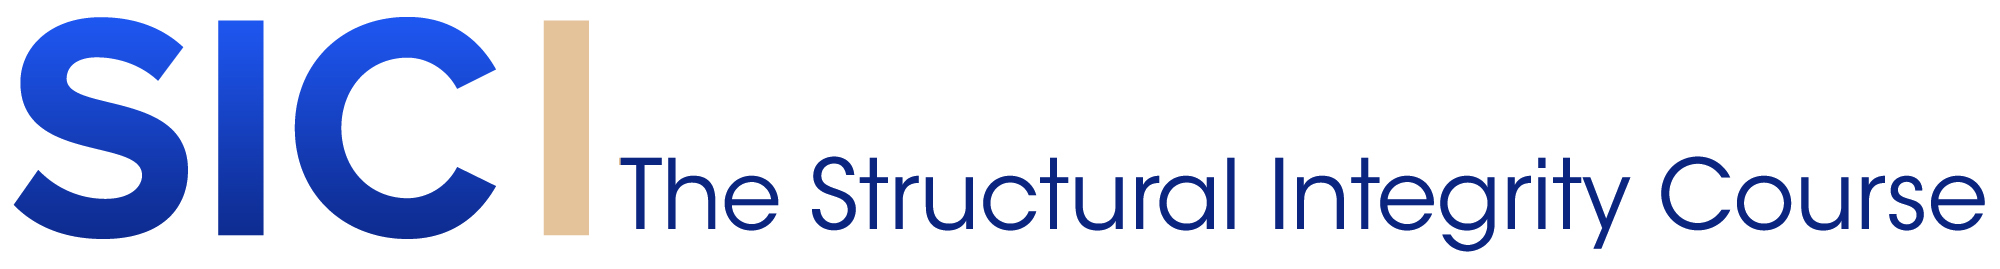 The Structural Integrity Course Logo